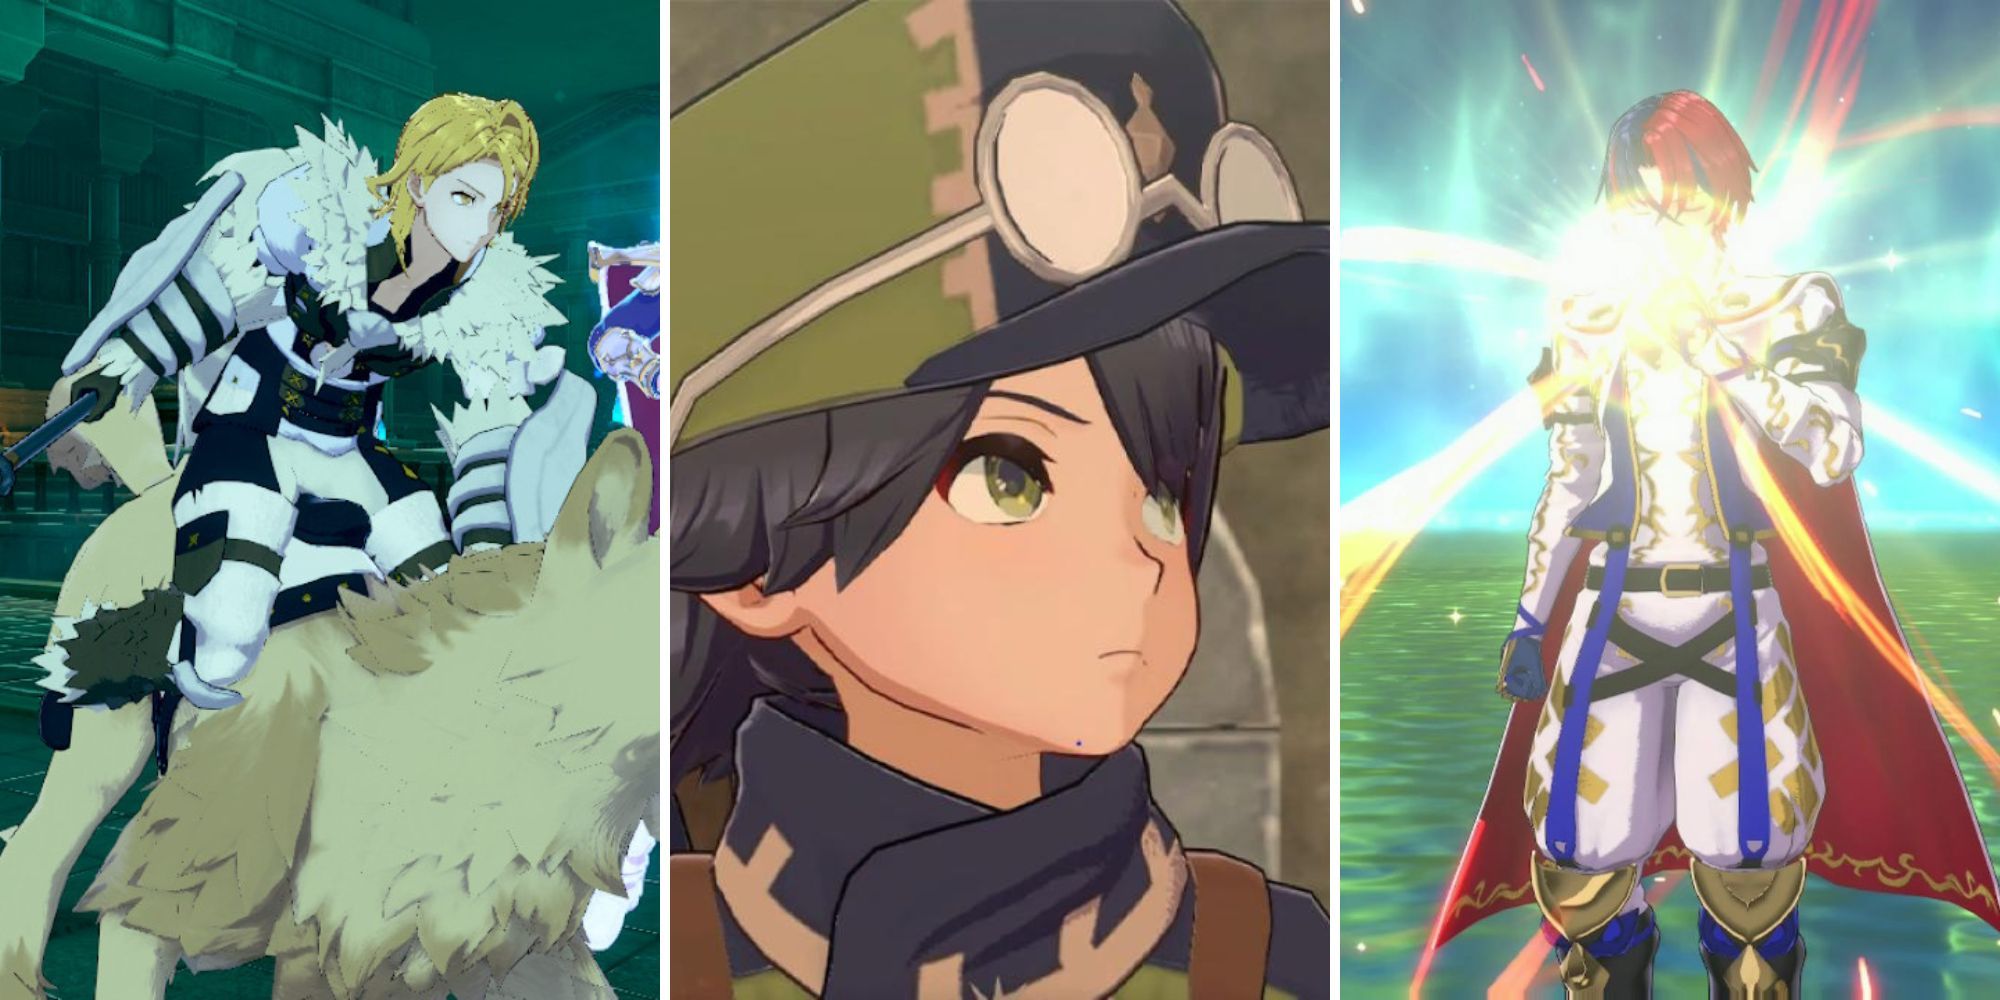 A grid of images showing three different characters from Fire Emblem Engage